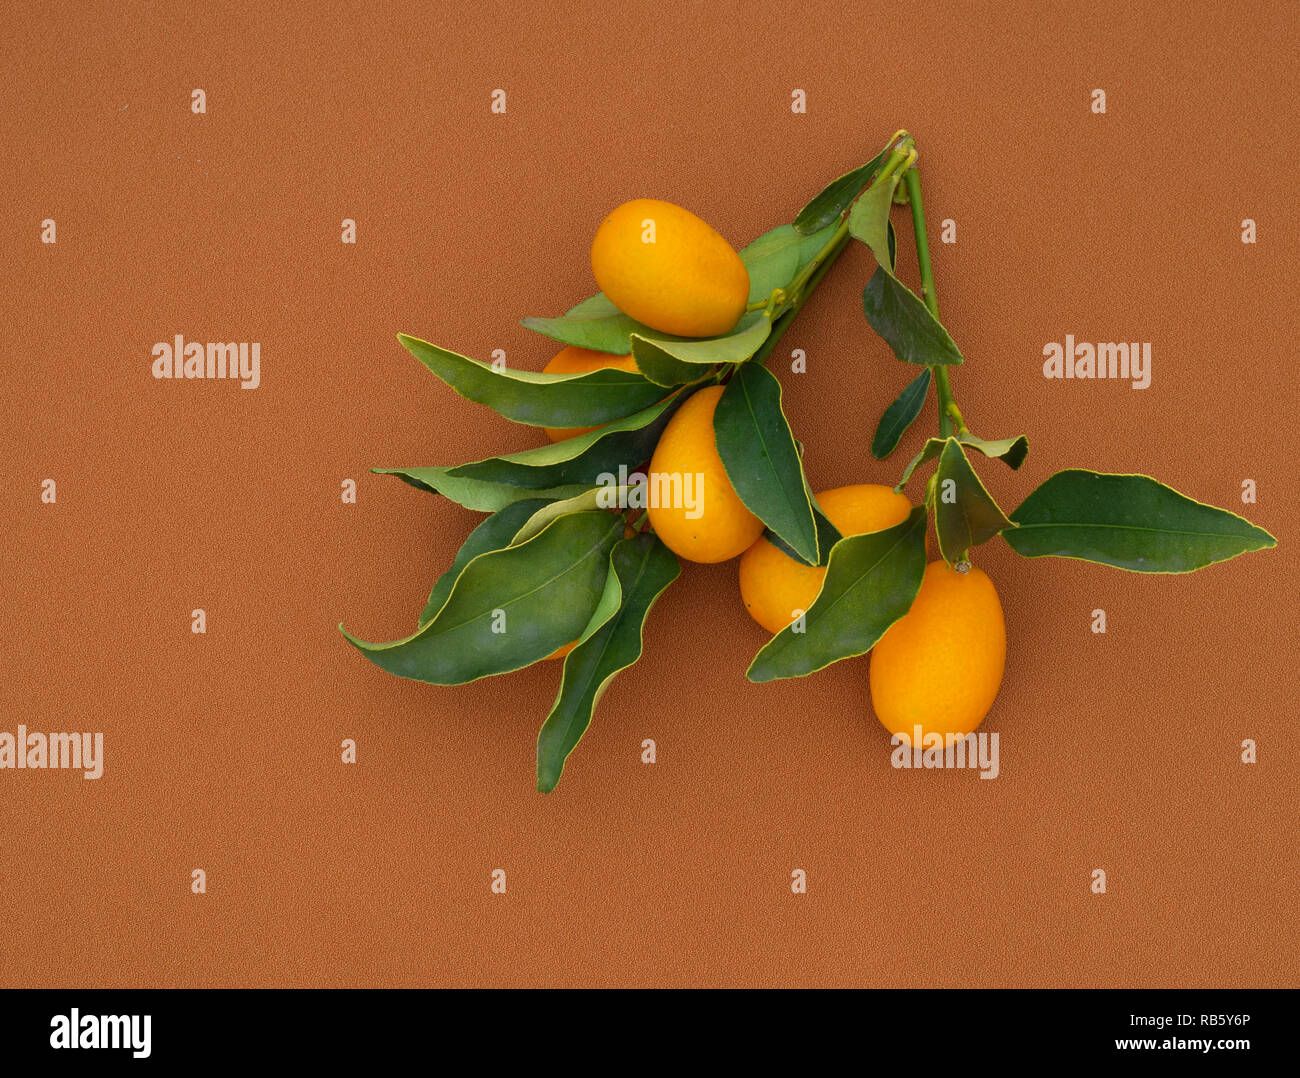 Kumquat, cumquat citrus fruits on smooth fabric, with leaves. Fresh picked. With copyspace. Stock Photo